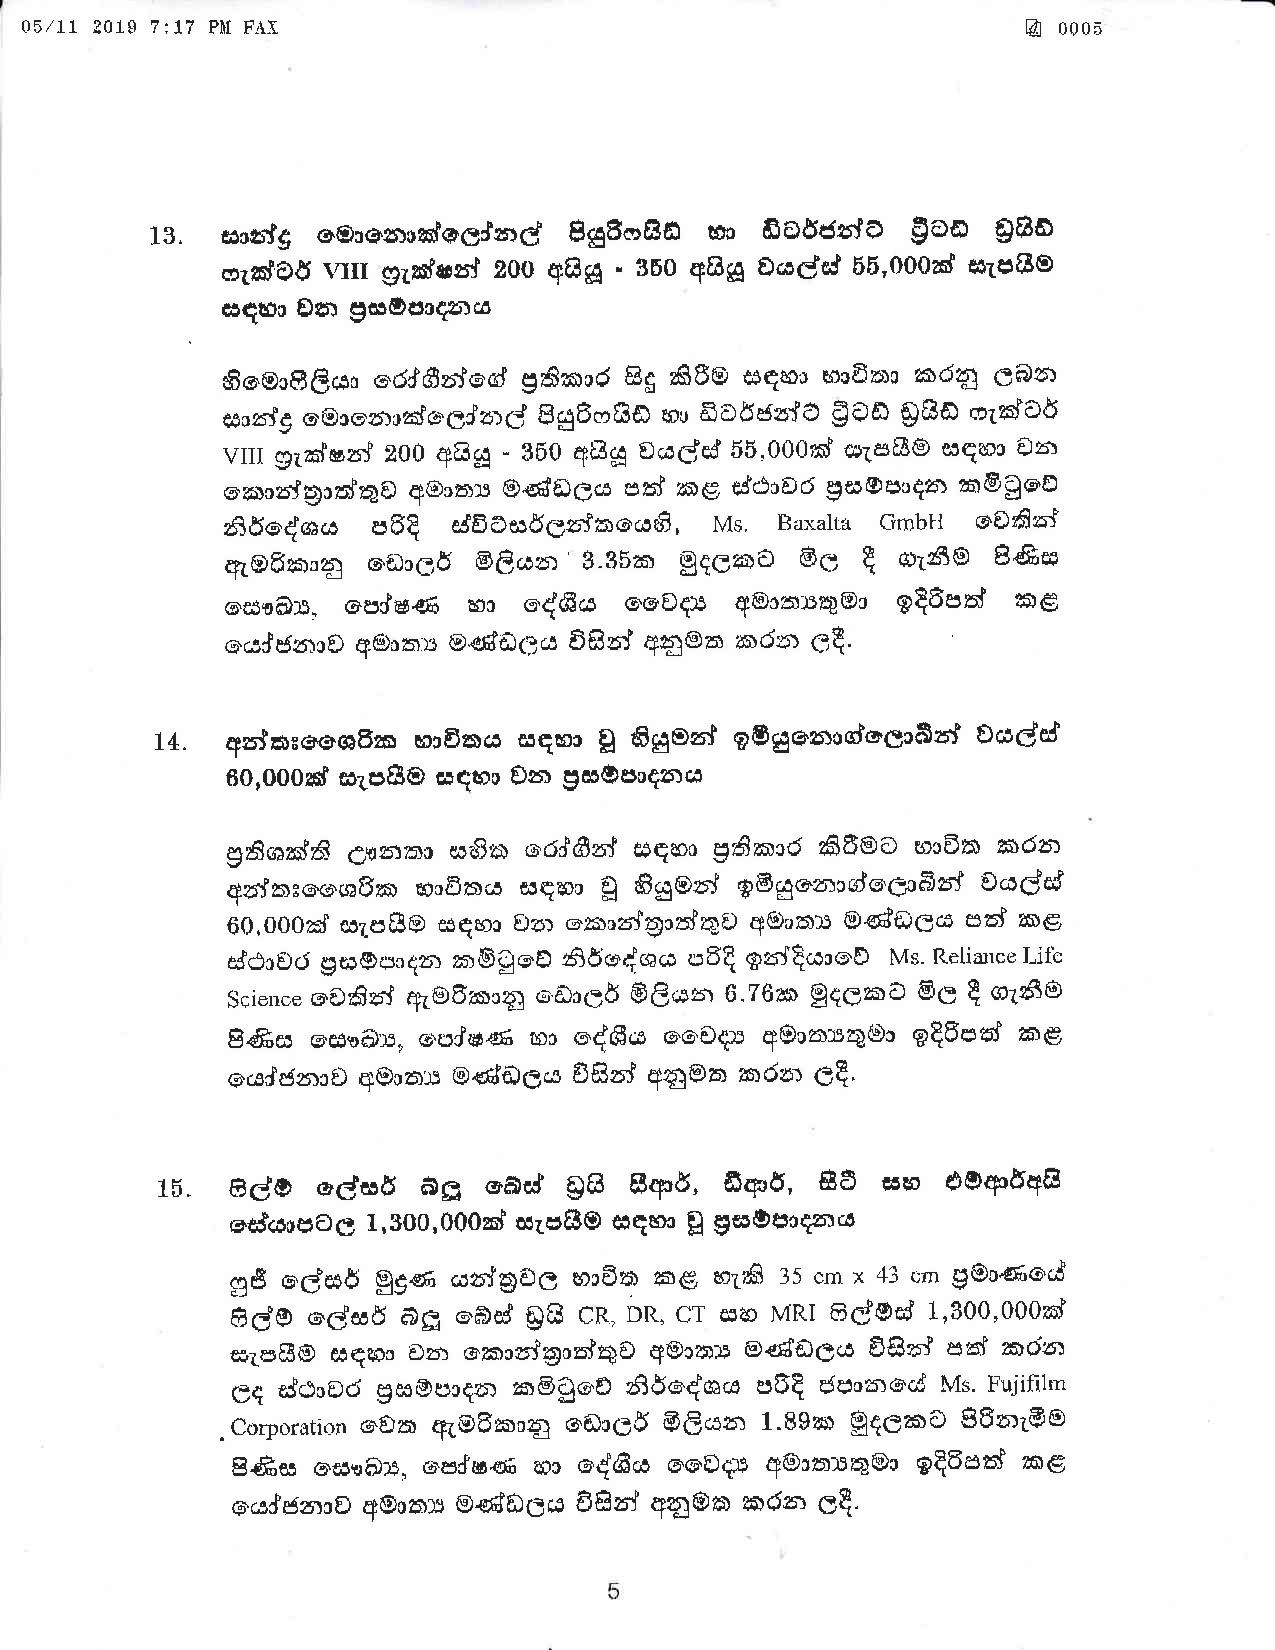 Cabinet Decision on 05.11.2019 page 005